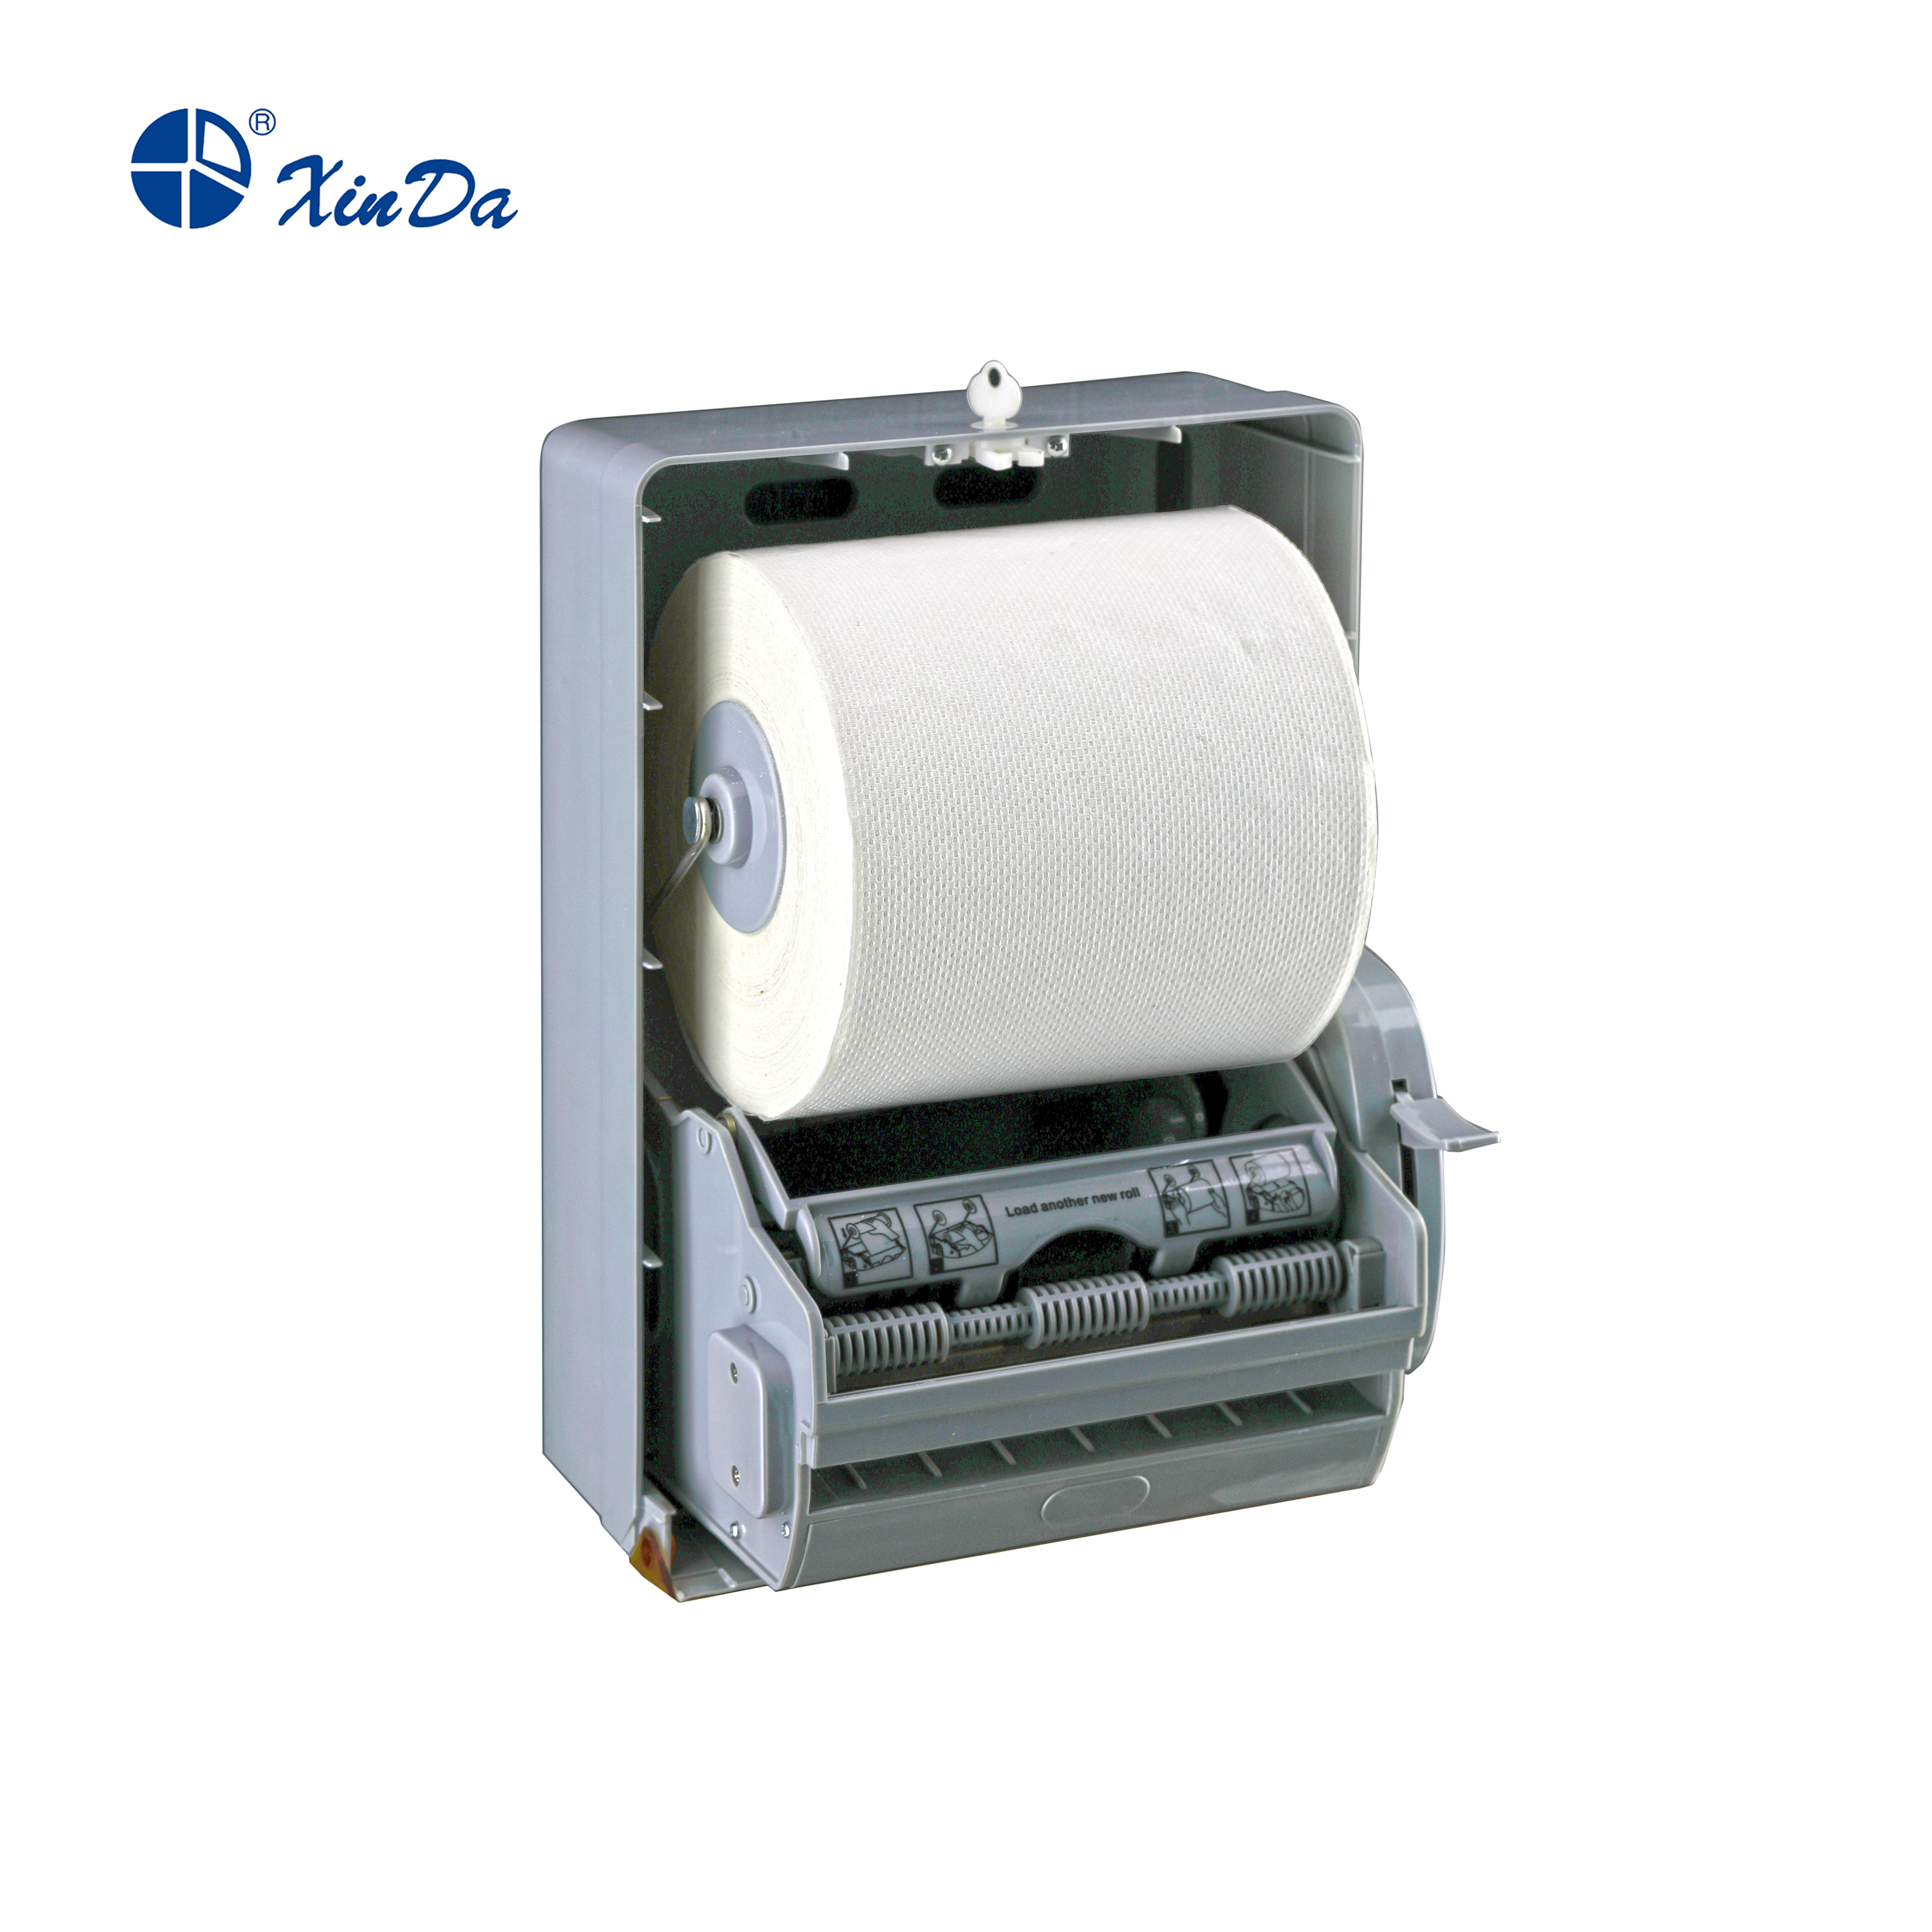 Types of Automatic/Paper Towel Roll Dispensers